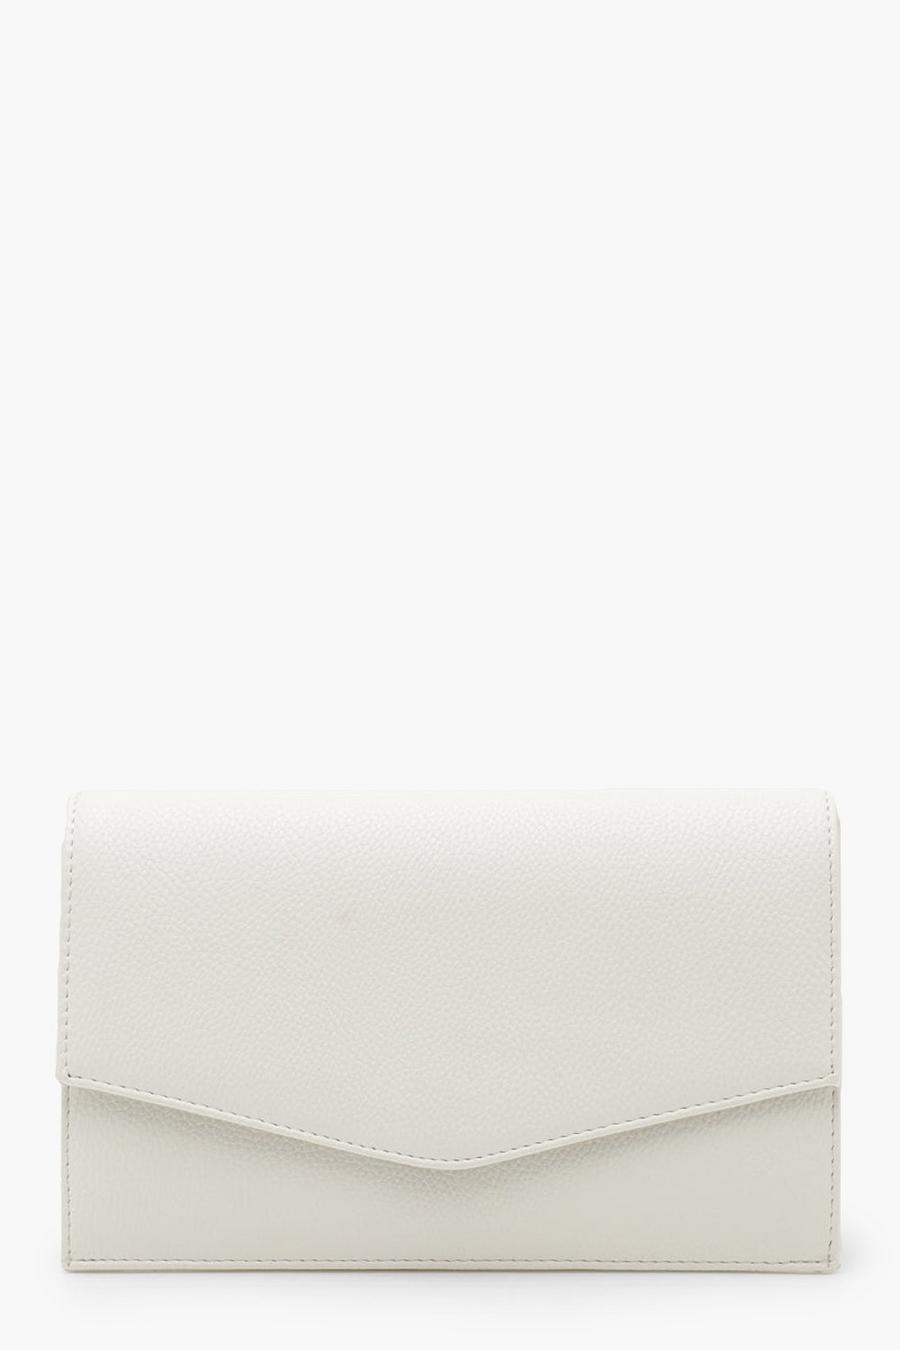 White blanco Grainy PU Envelope Clutch Bag and Chain